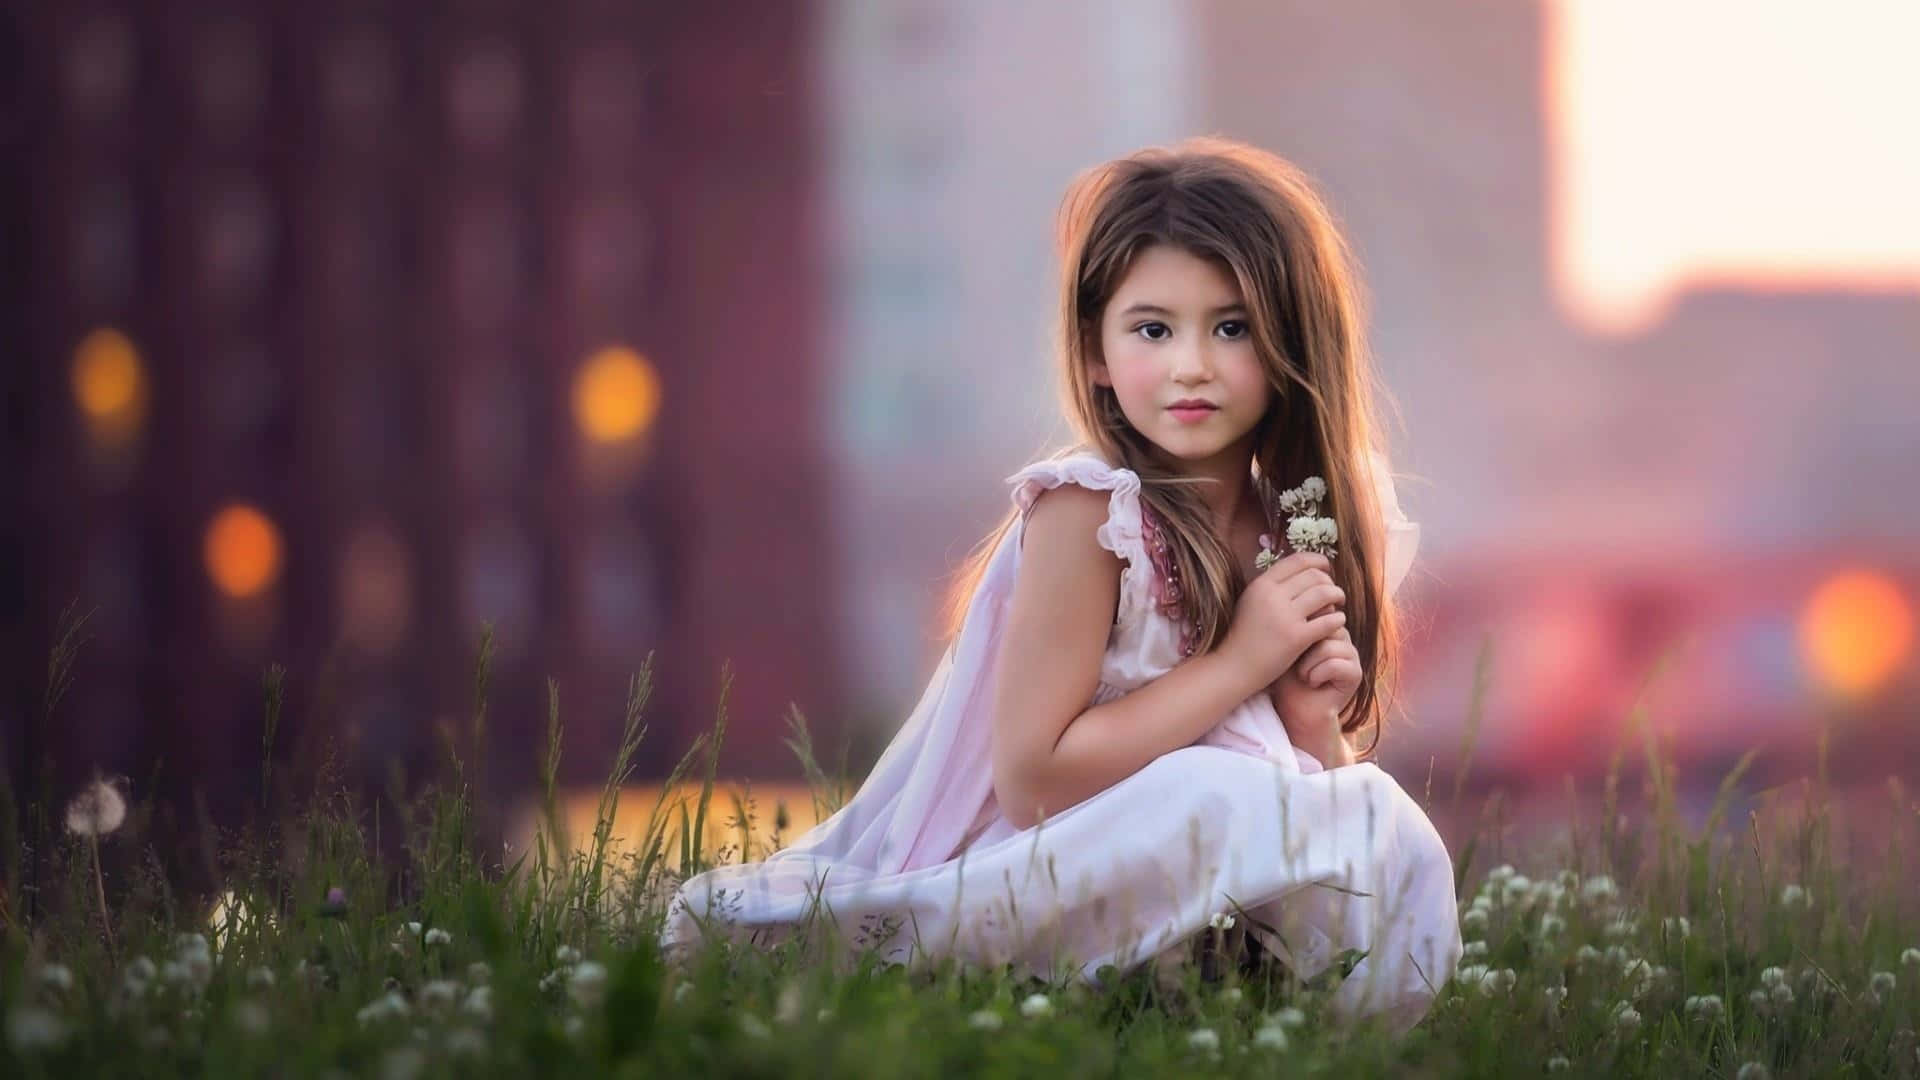 Young Girl Sunset Meadow Wallpaper